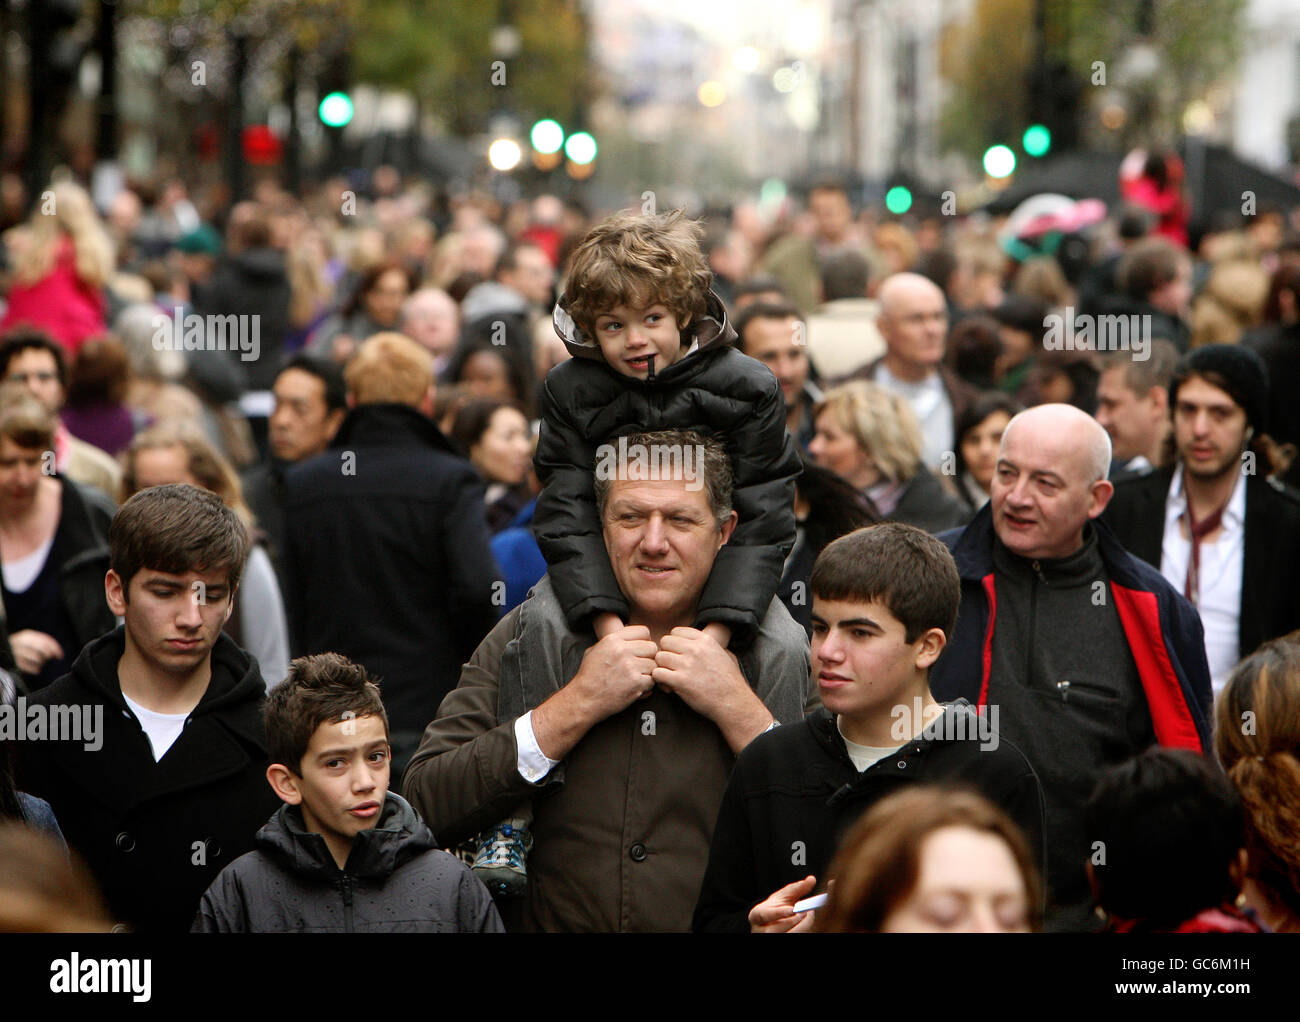 Traffic free Christmas shopping. Christmas shoppers on Oxford Street, central London, during the 5th annual Very Important Pedestrians event. Stock Photo